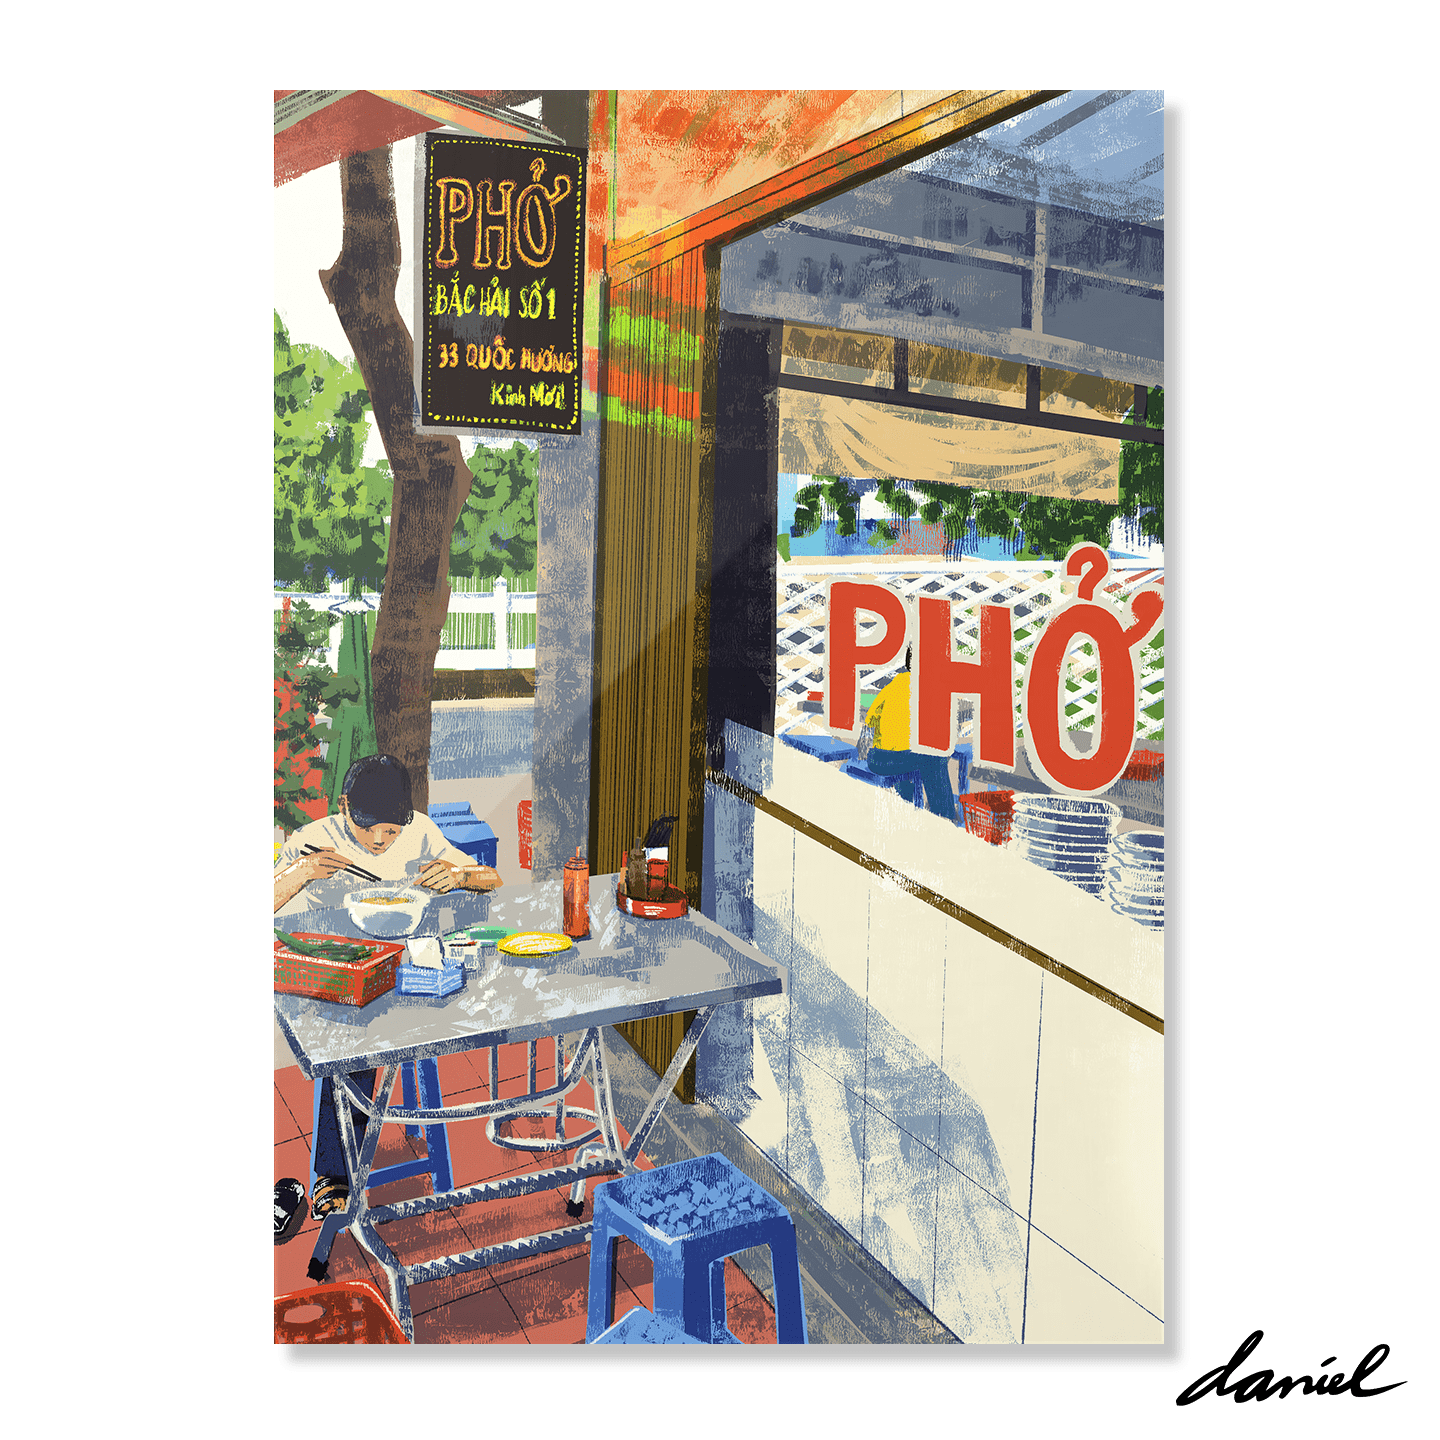 Lunchtime Pho